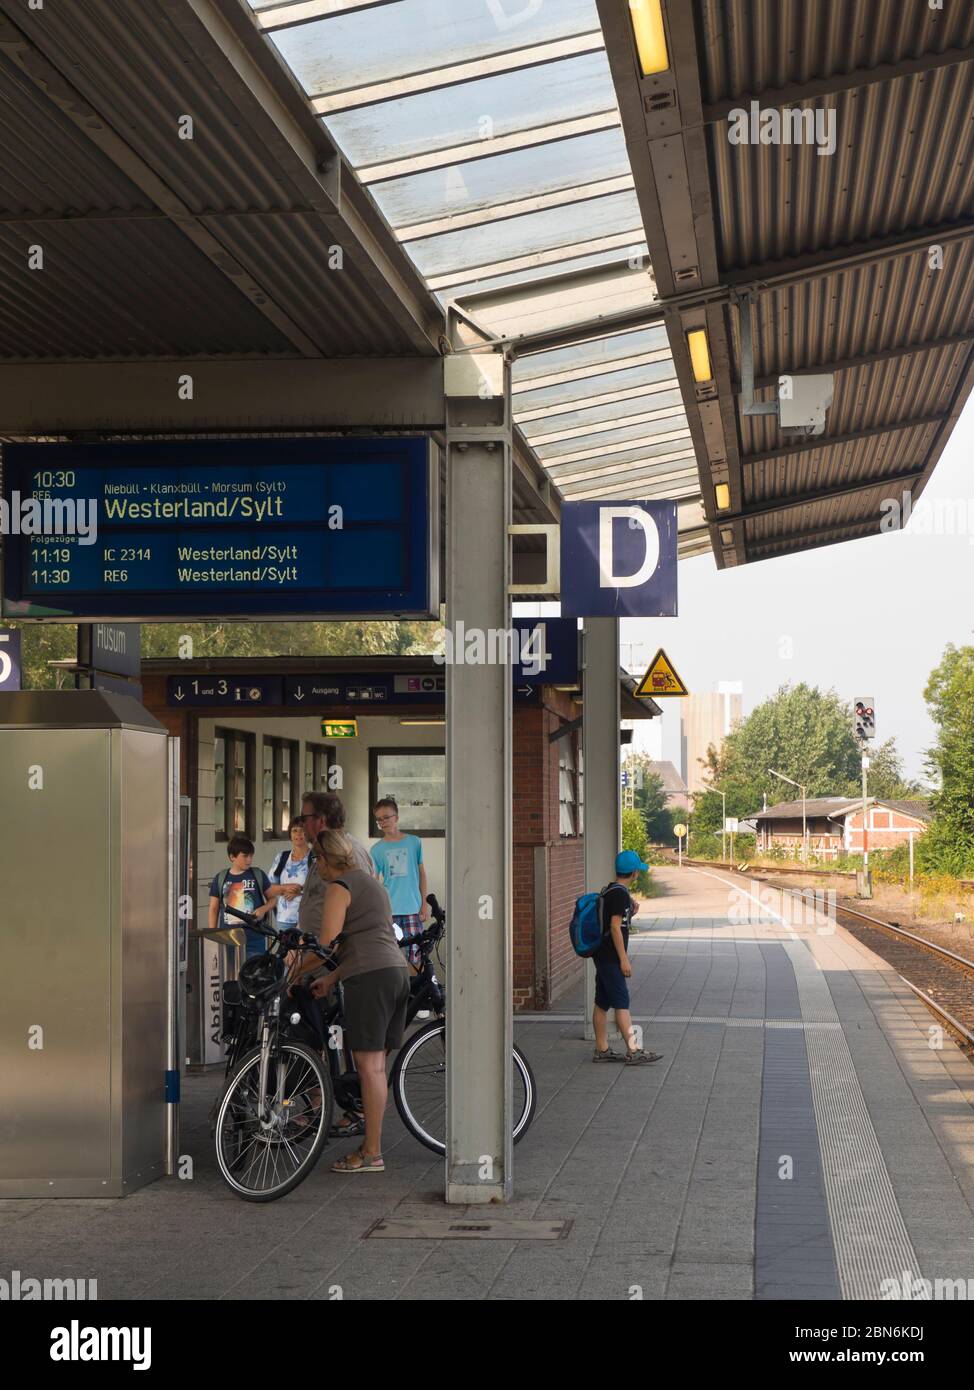 Railway platform in Husum Germany, frequent train service to Sylt and Hamburg Stock Photo